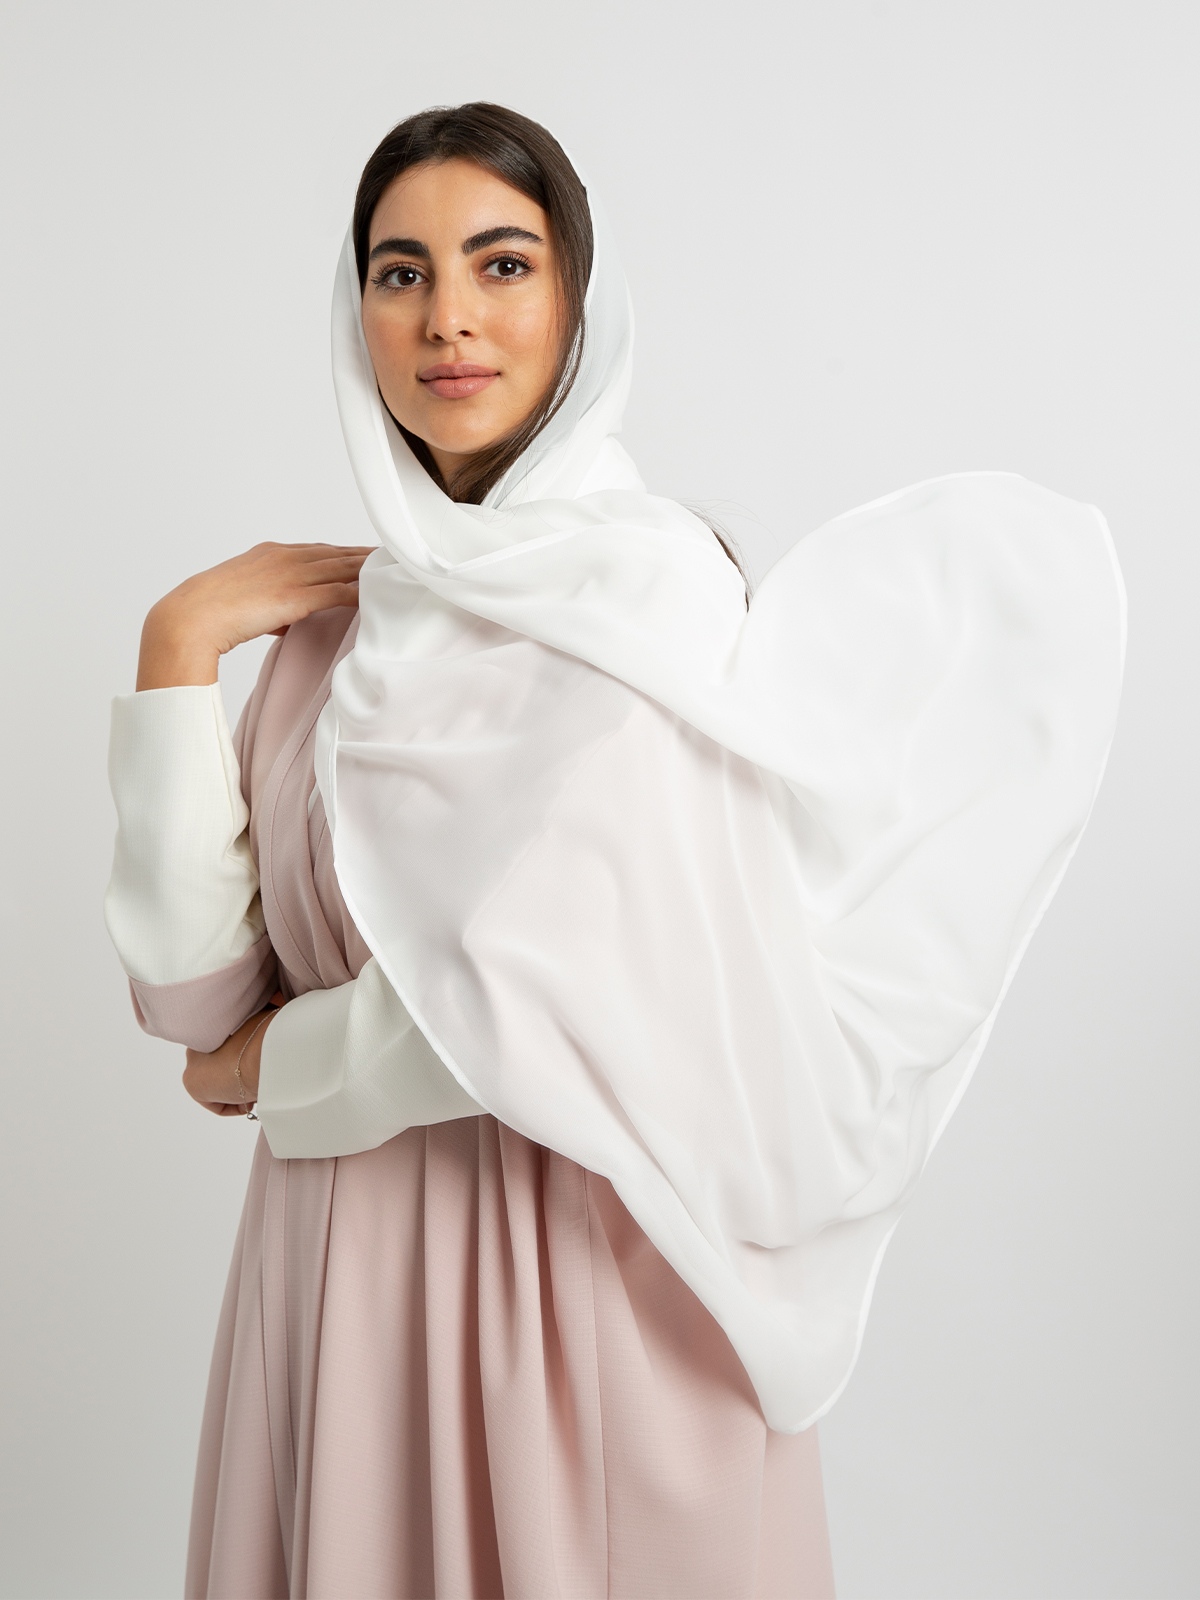 Kaafmeem women clothing 2 color pink and white butterfly wide cut long elegant abaya in lightweight fabric for outings